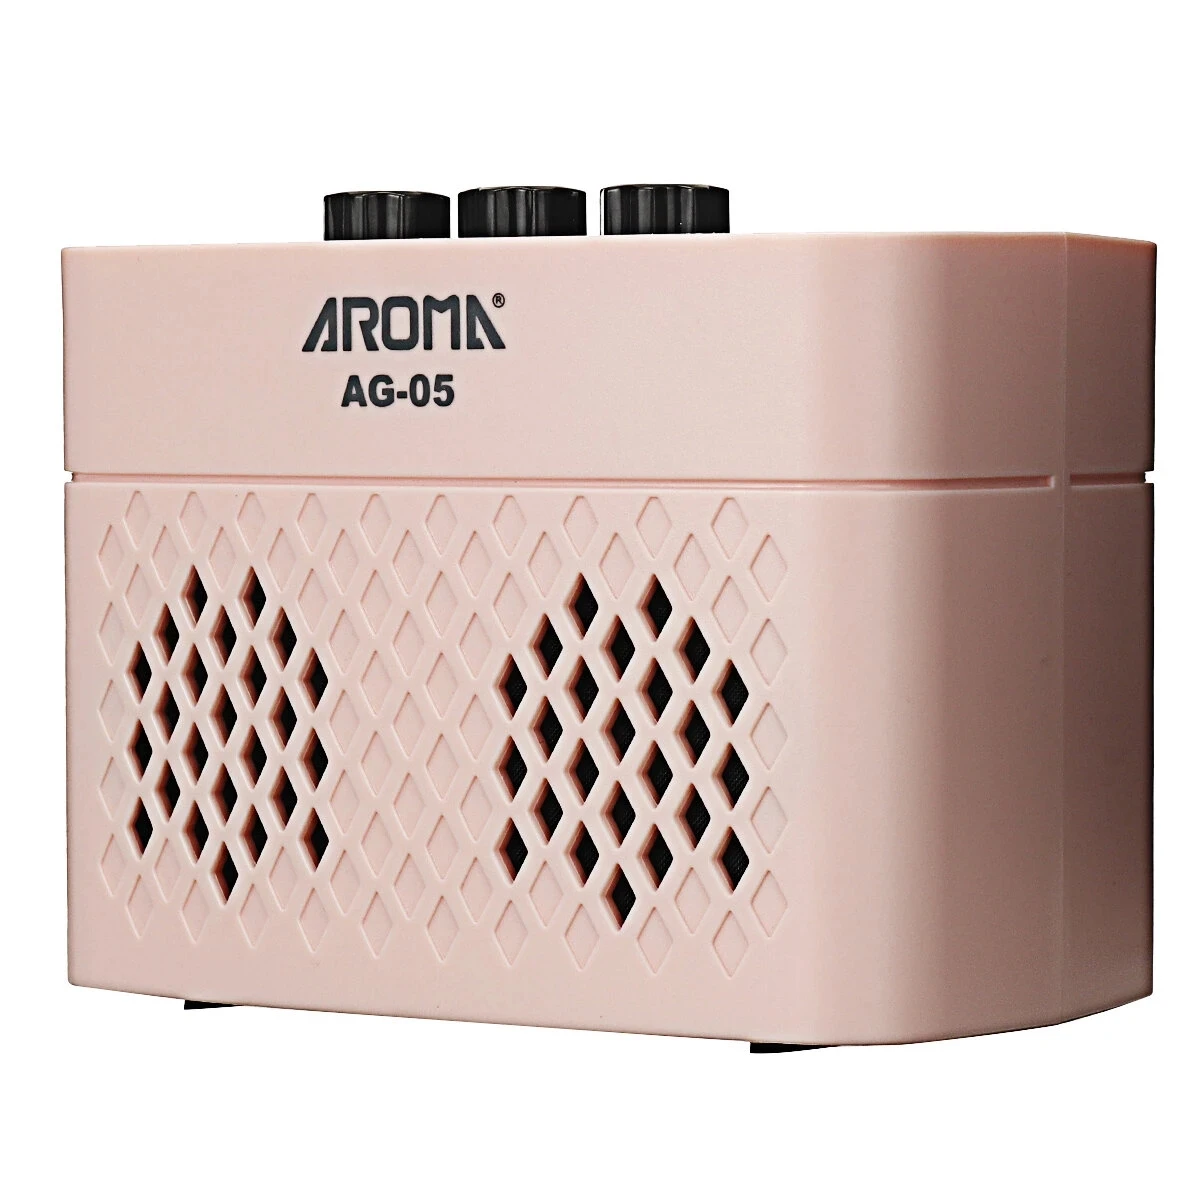 AROMA AG-05 Bluetooth Electric Guitar Amp Amplifier 5-Watt Stereo Output Distortion Gain Tone Control 3.5mm Monitoring 6.35mm enlarge